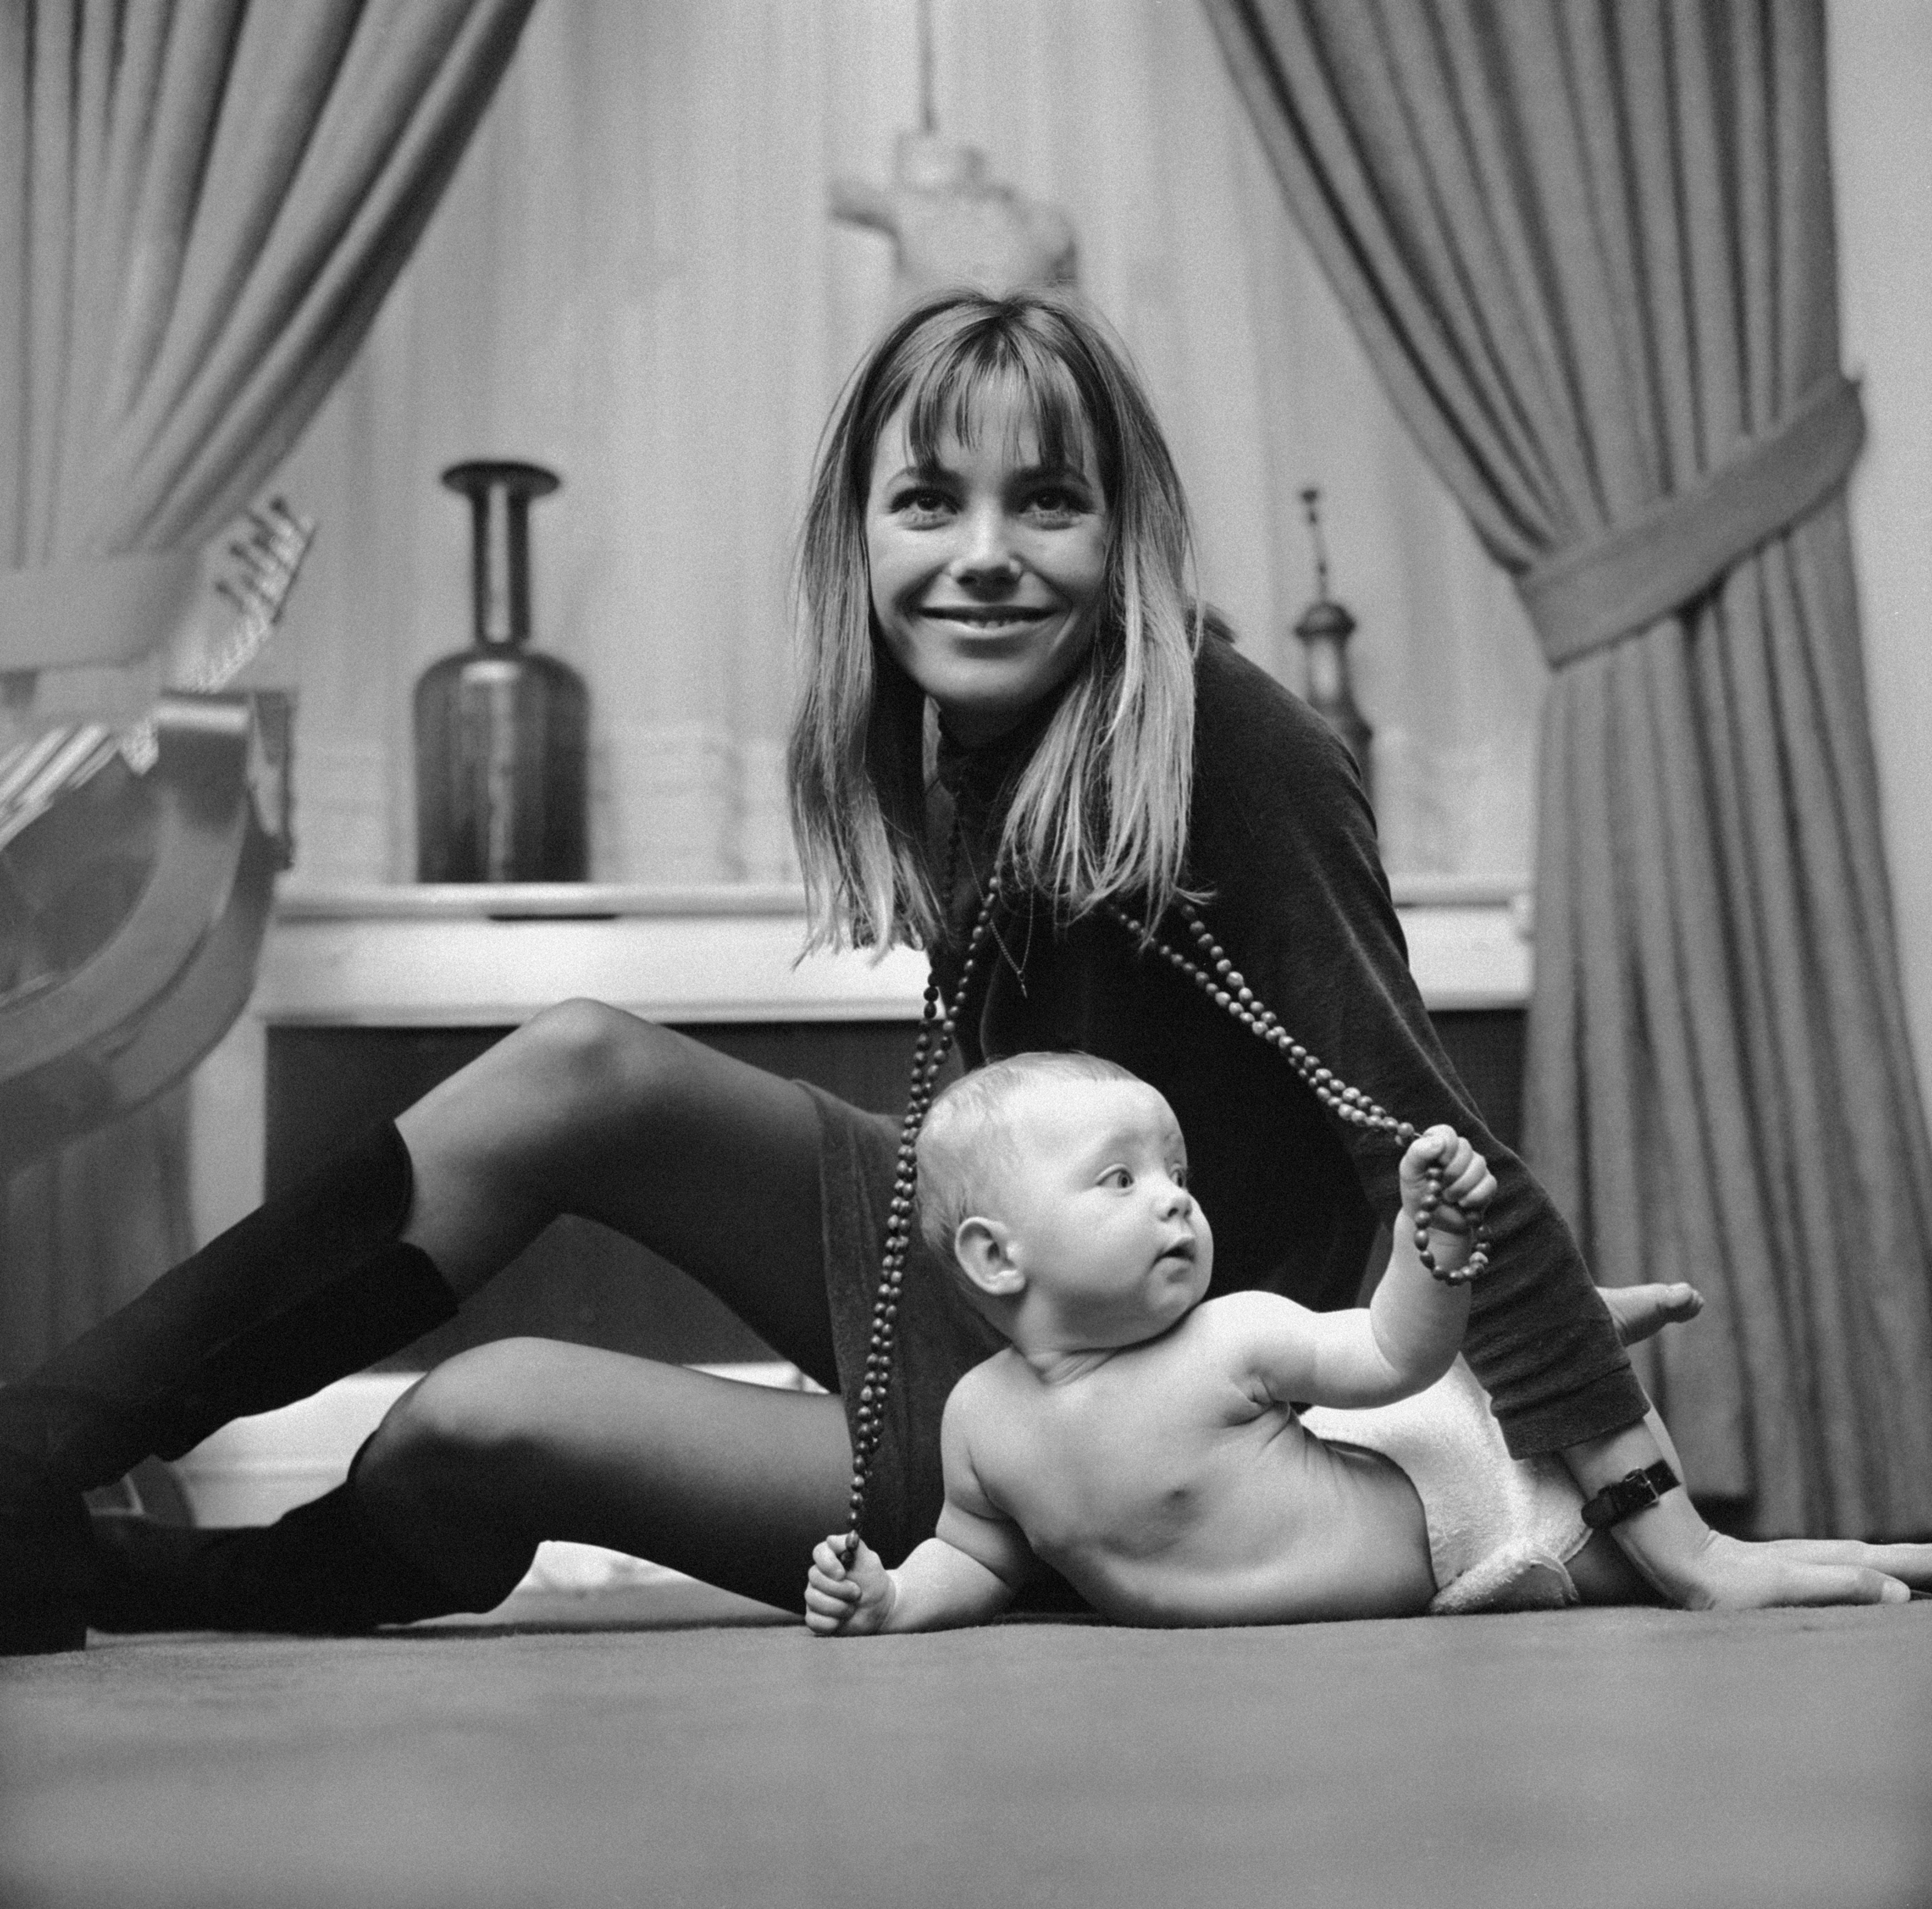 https://hips.hearstapps.com/hmg-prod/images/english-actress-and-singer-jane-birkin-with-7-month-old-news-photo-1626380190.jpg